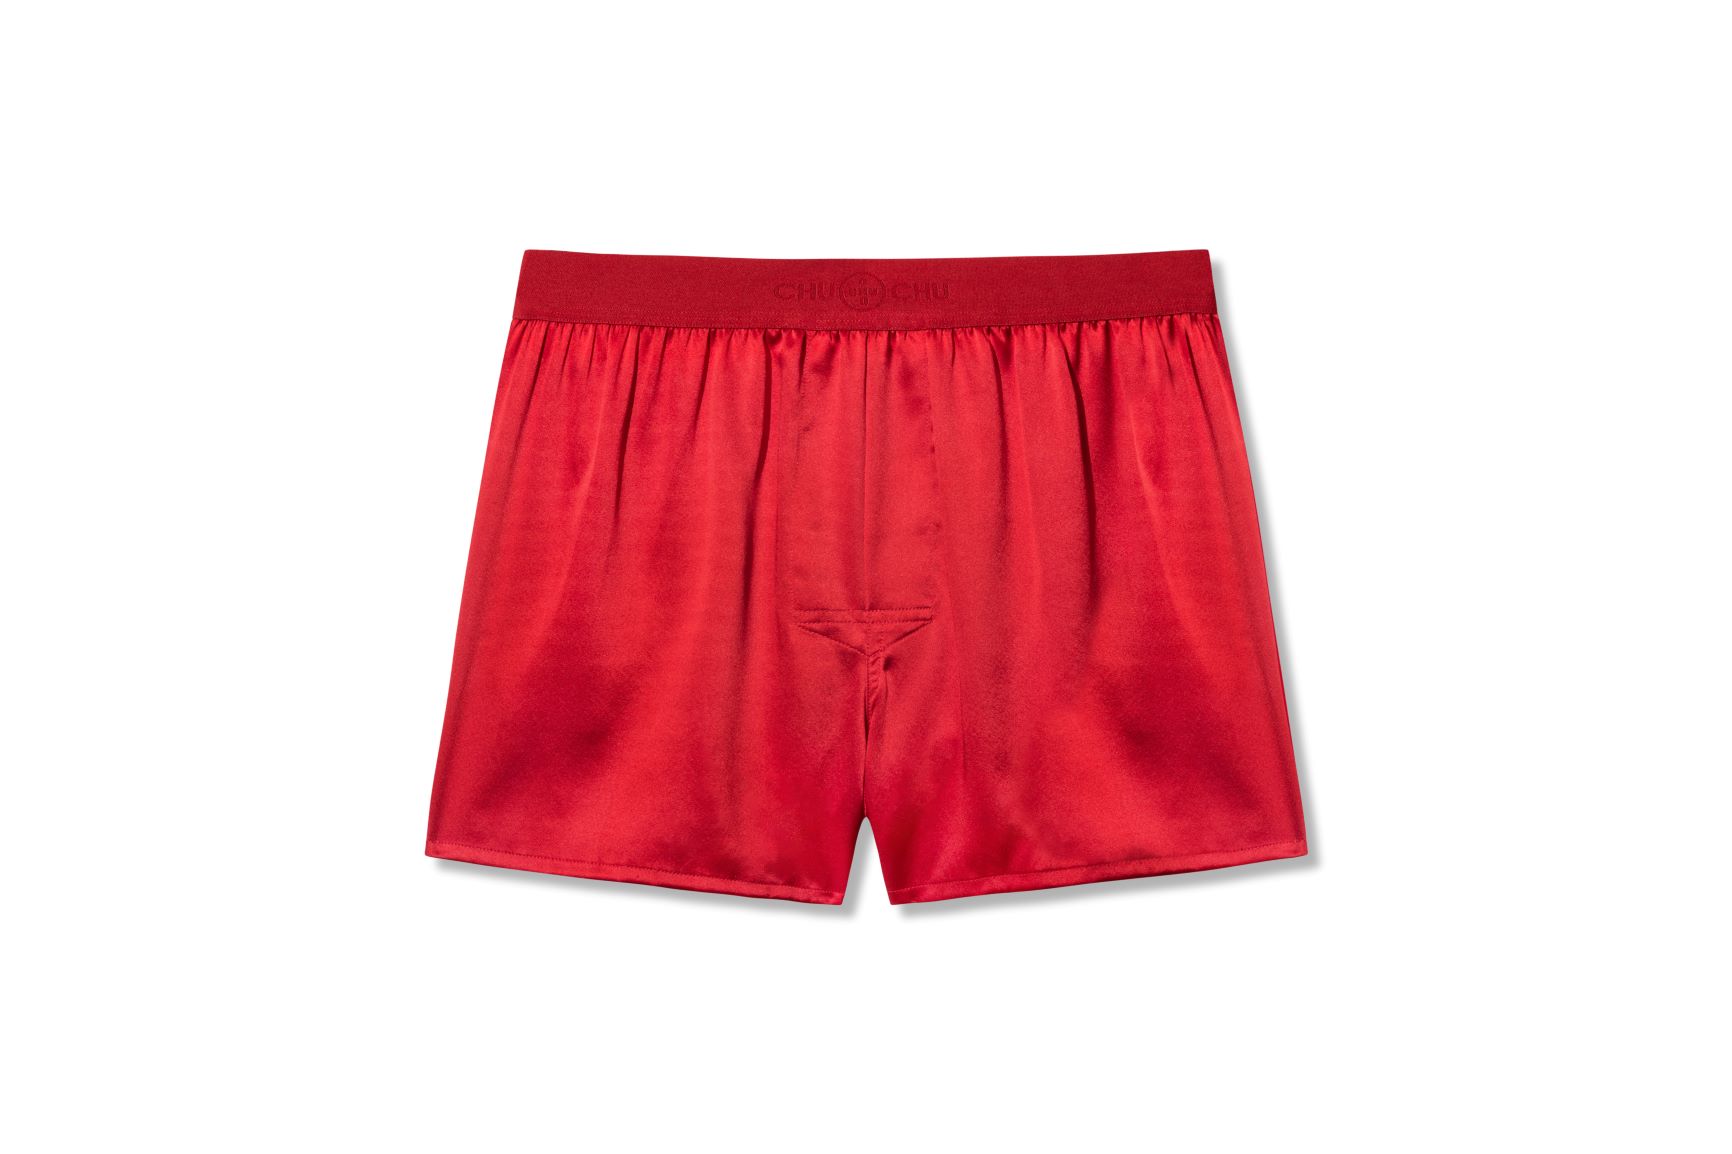 9 Amazing Silk Boxer Shorts For Men for 2023